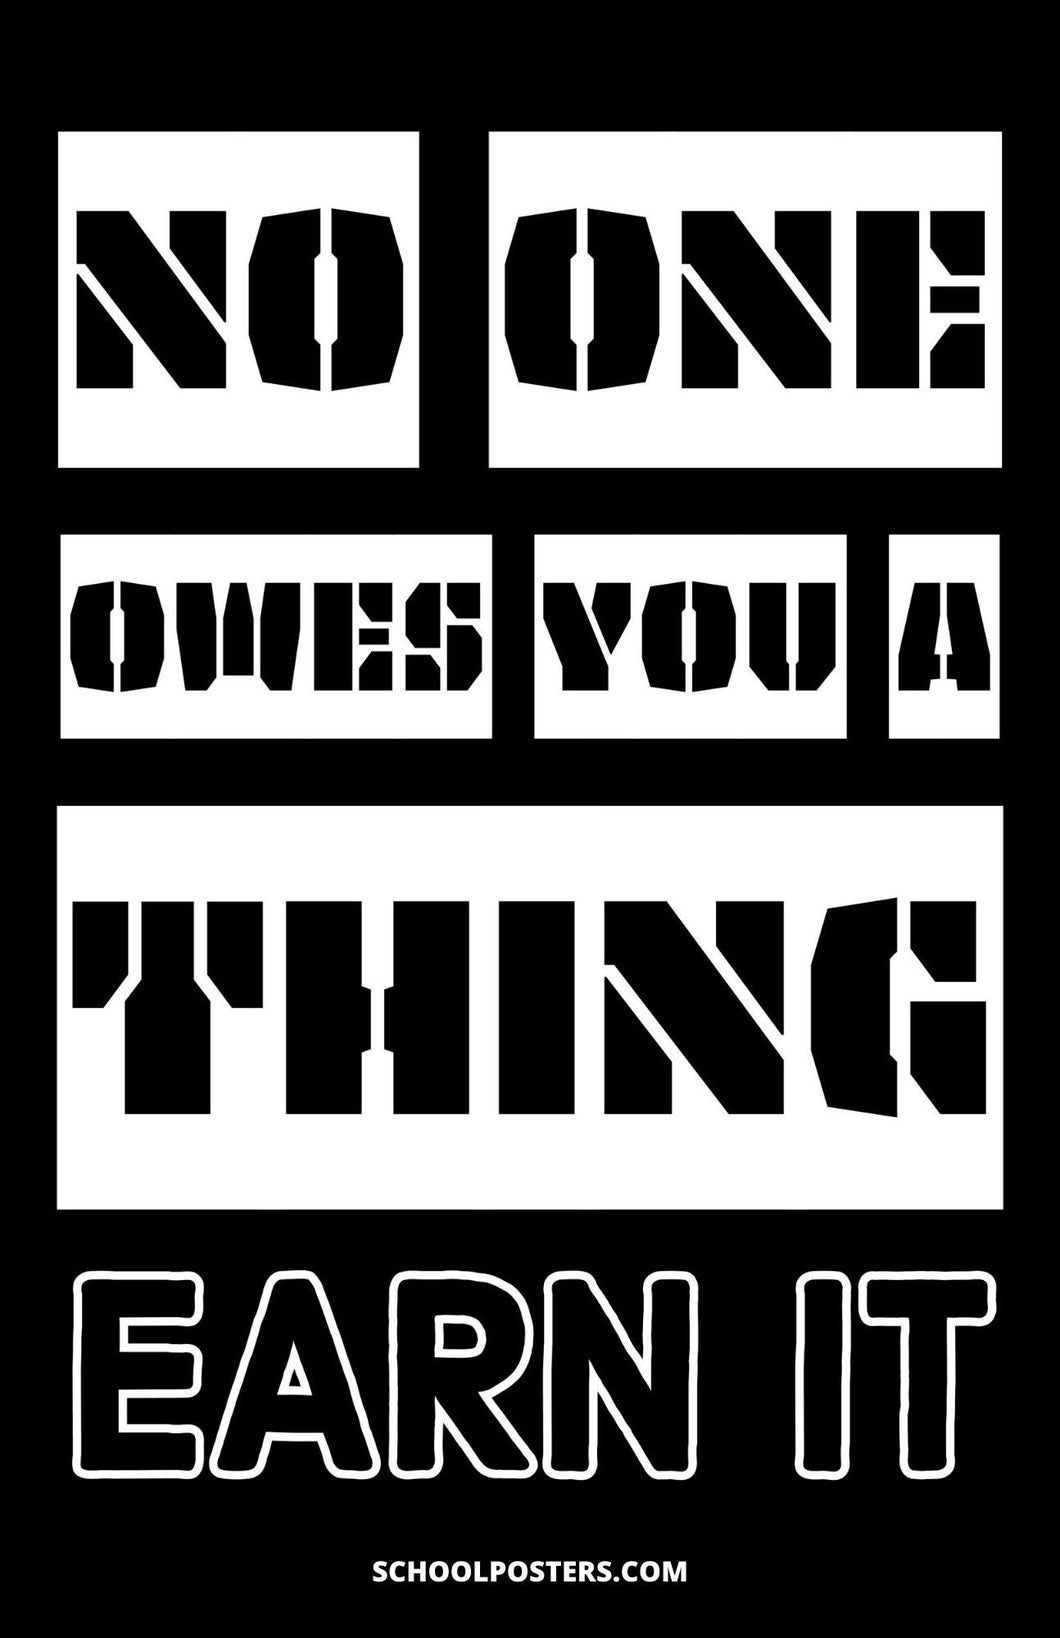 No One Owes You A Thing Earn It Poster